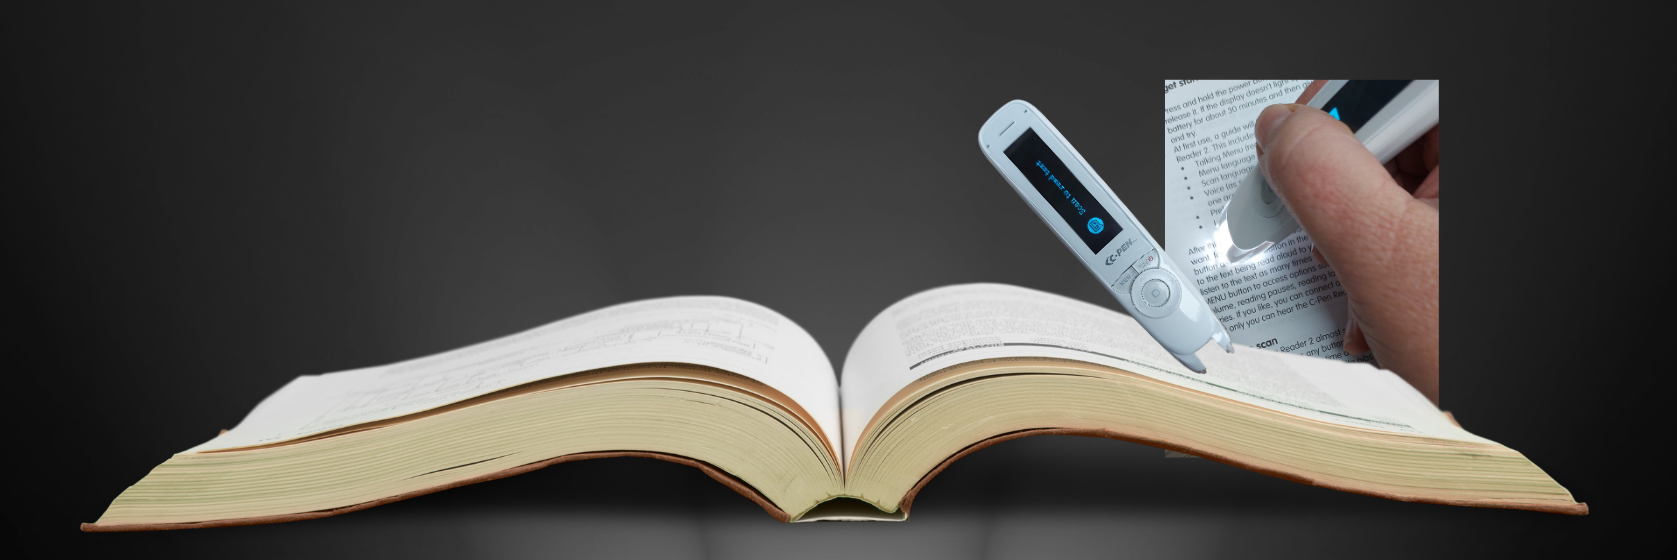 C-Pen text Reader with Book on black background